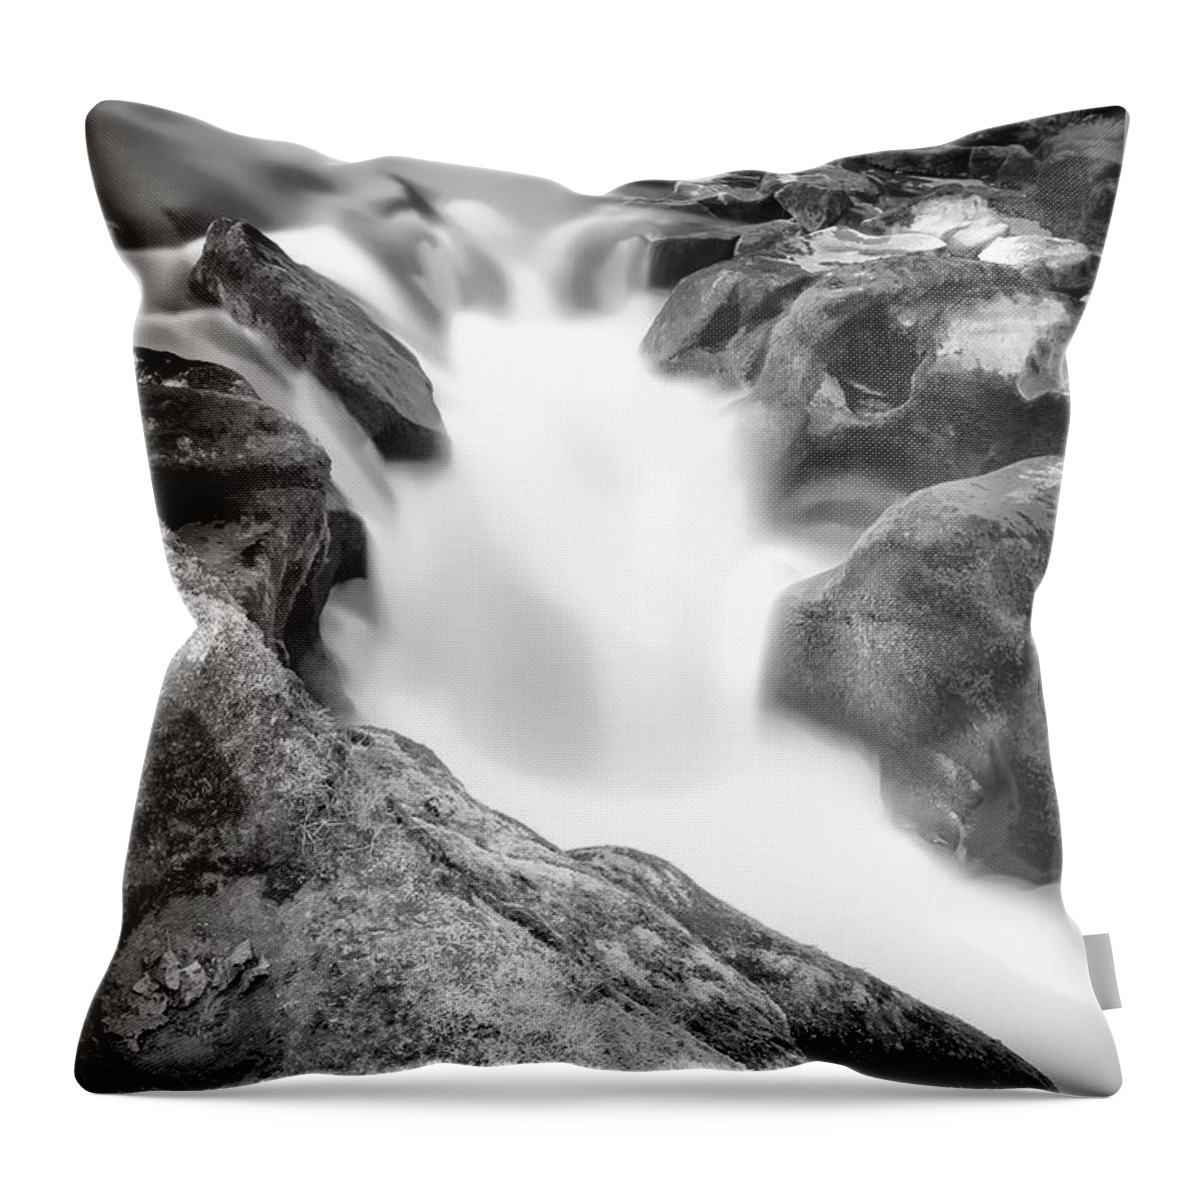 Bolton Abbey Throw Pillow featuring the photograph Waterfall on The River Wharfe by Mariusz Talarek